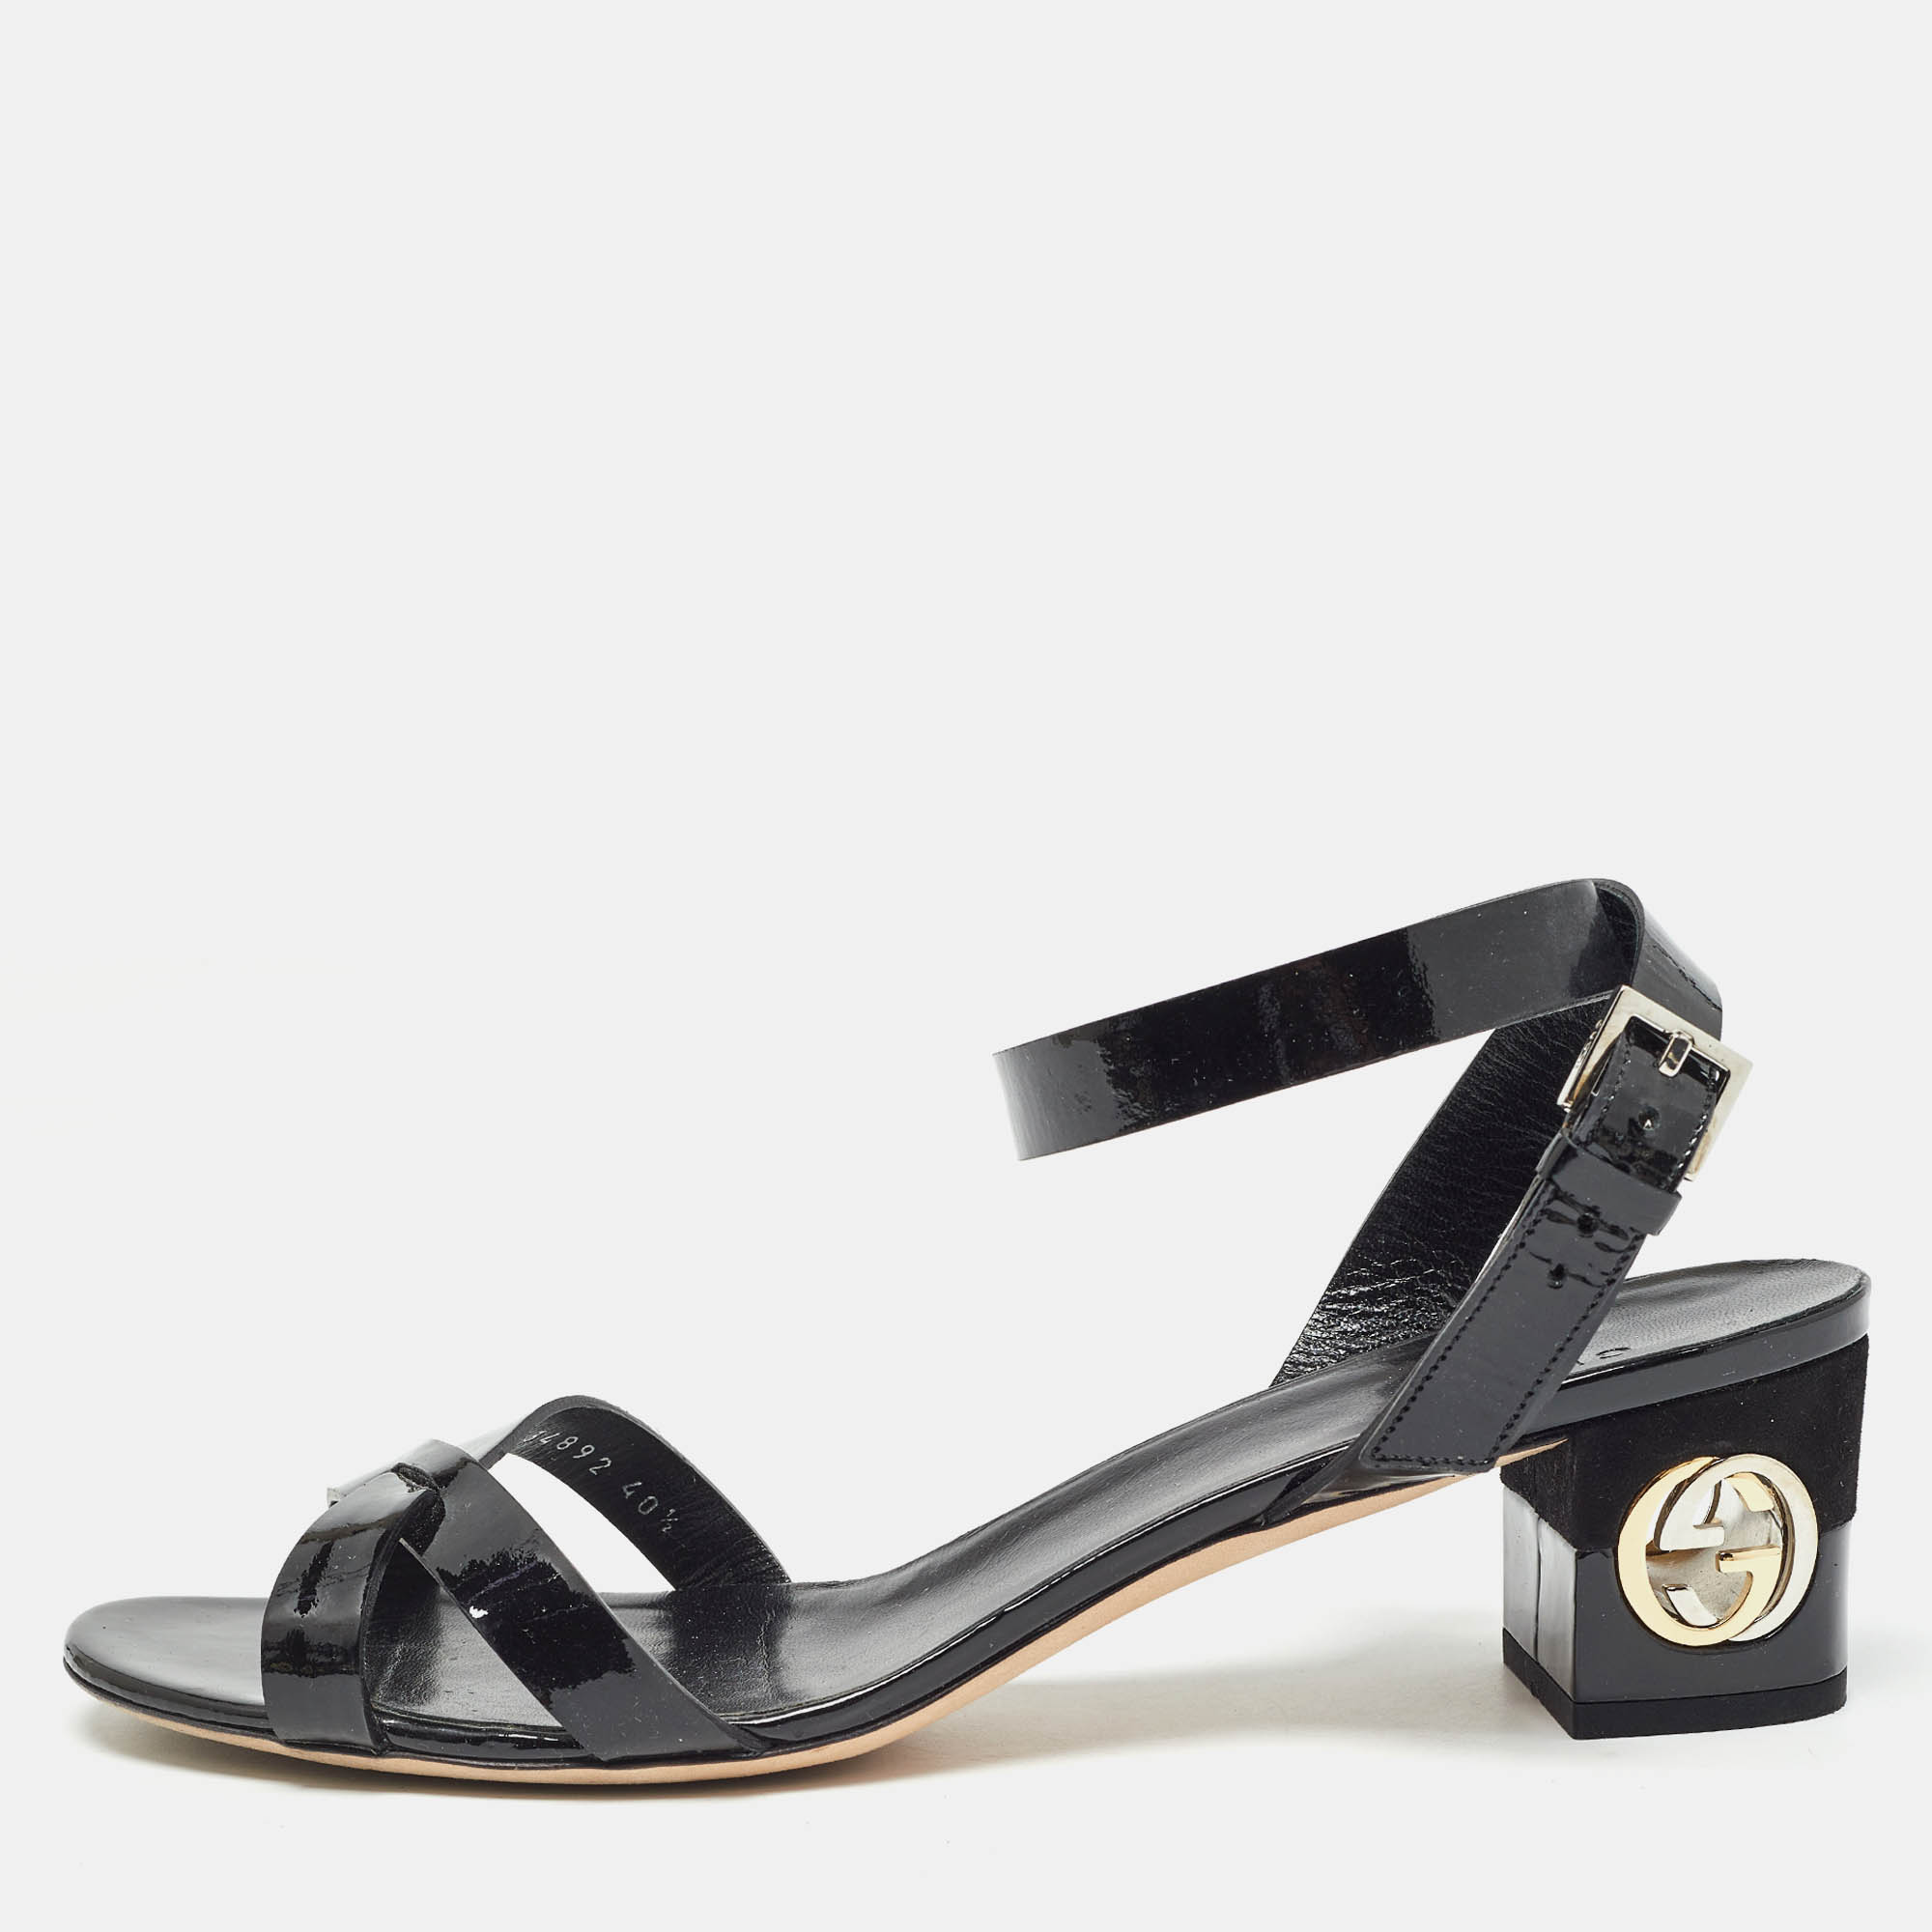 Gucci black patent leather ankle strap sandals size 40.5